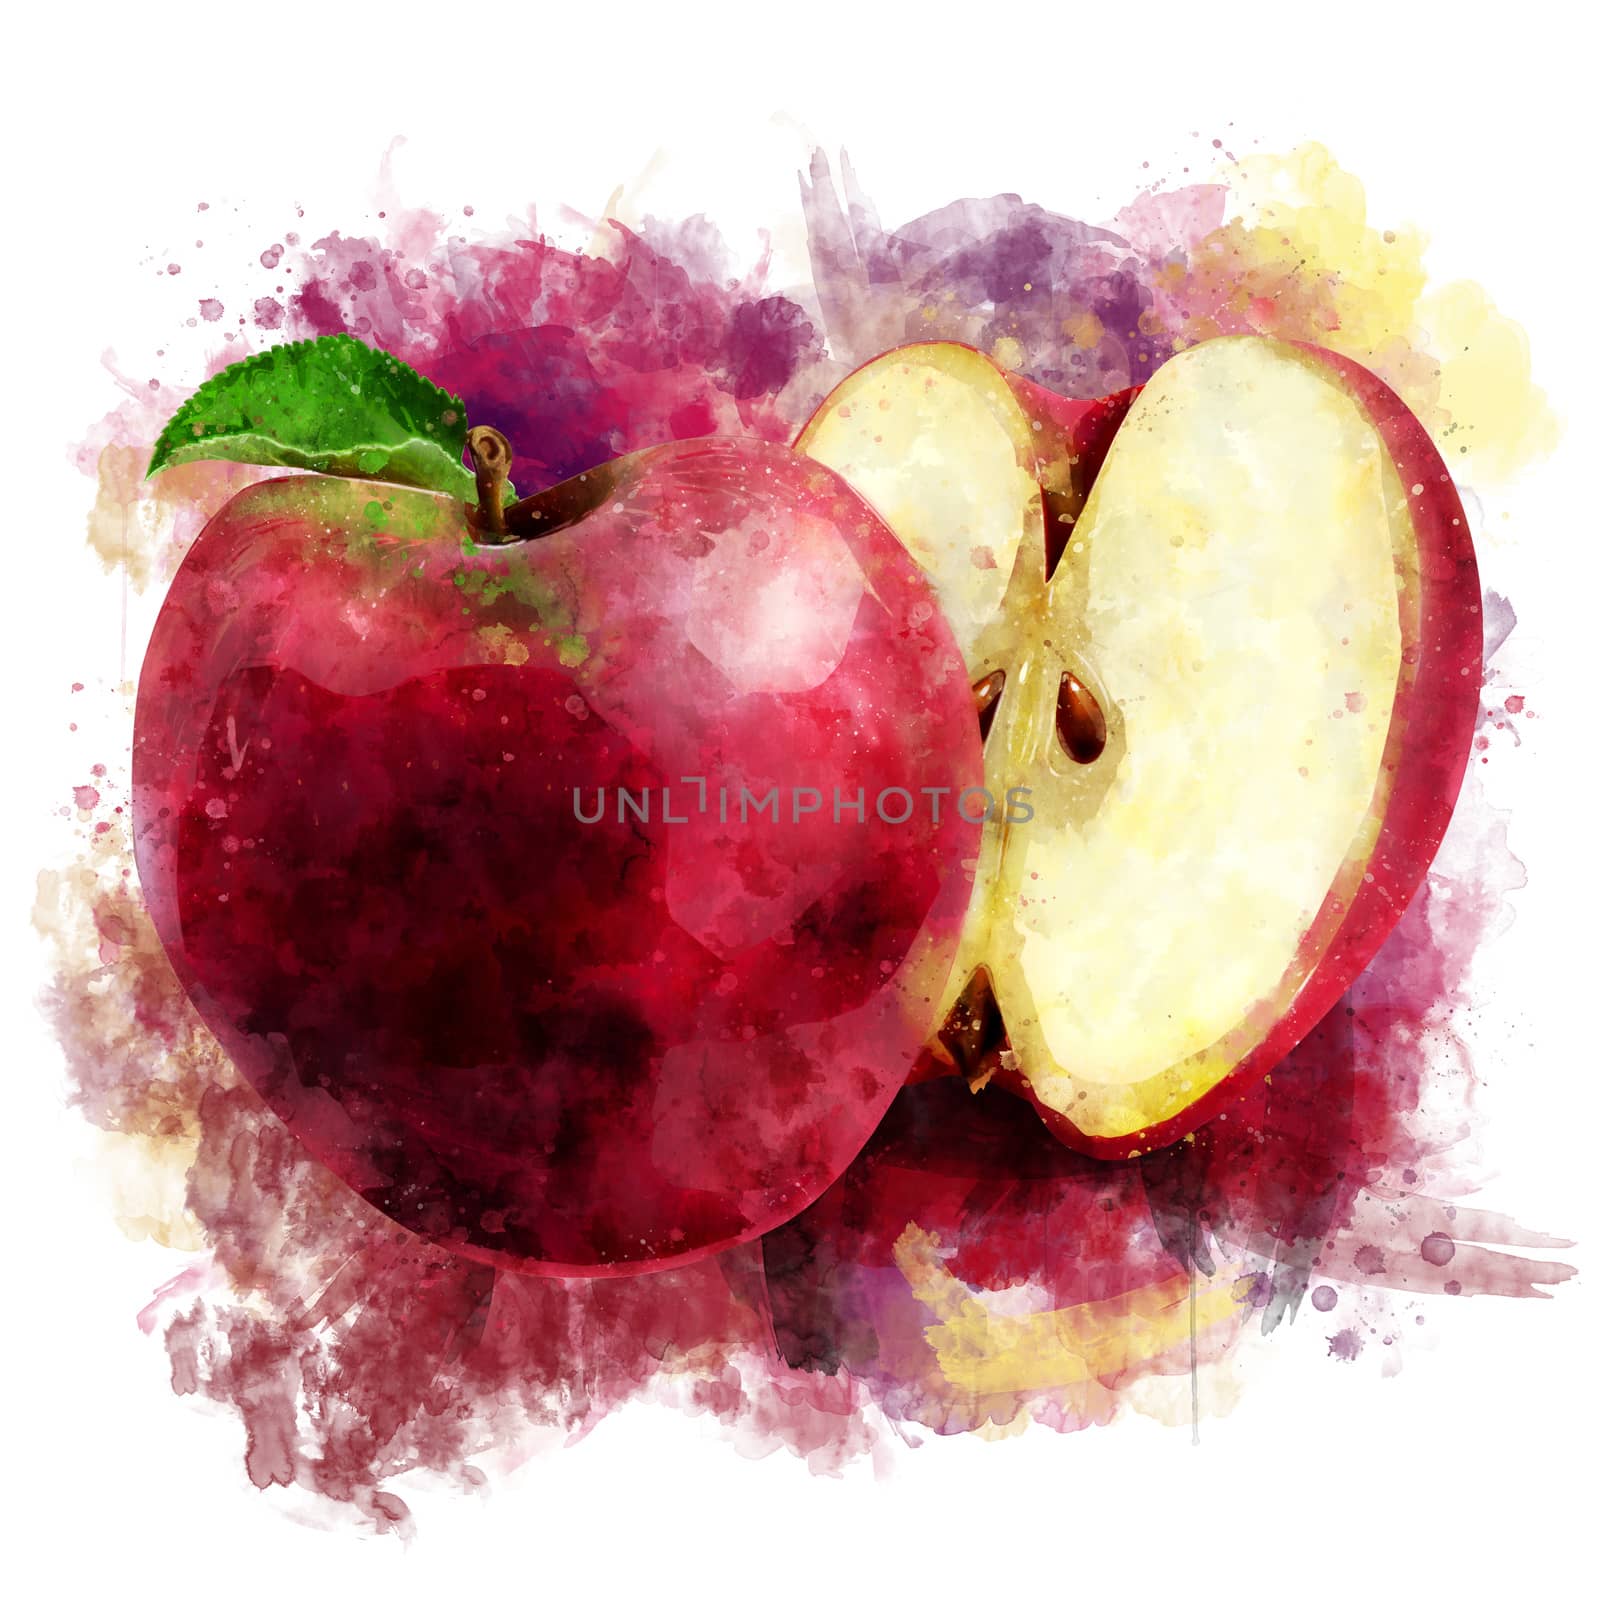 Red Apple on white background. Watercolor illustration by ConceptCafe